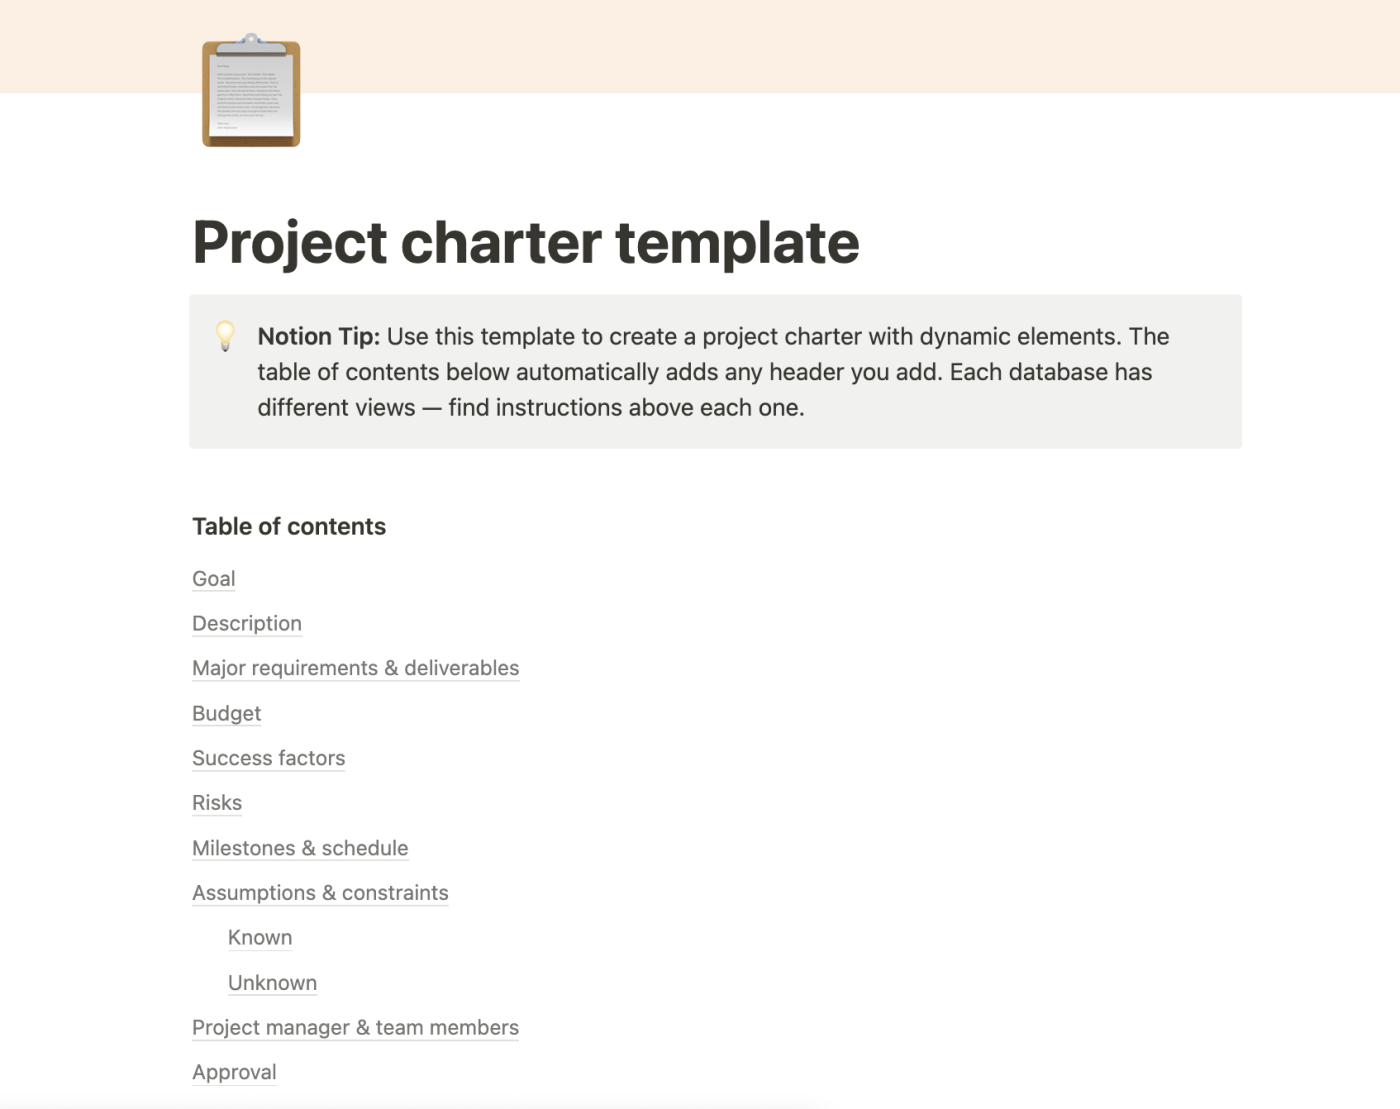 A project charter template from Notion.